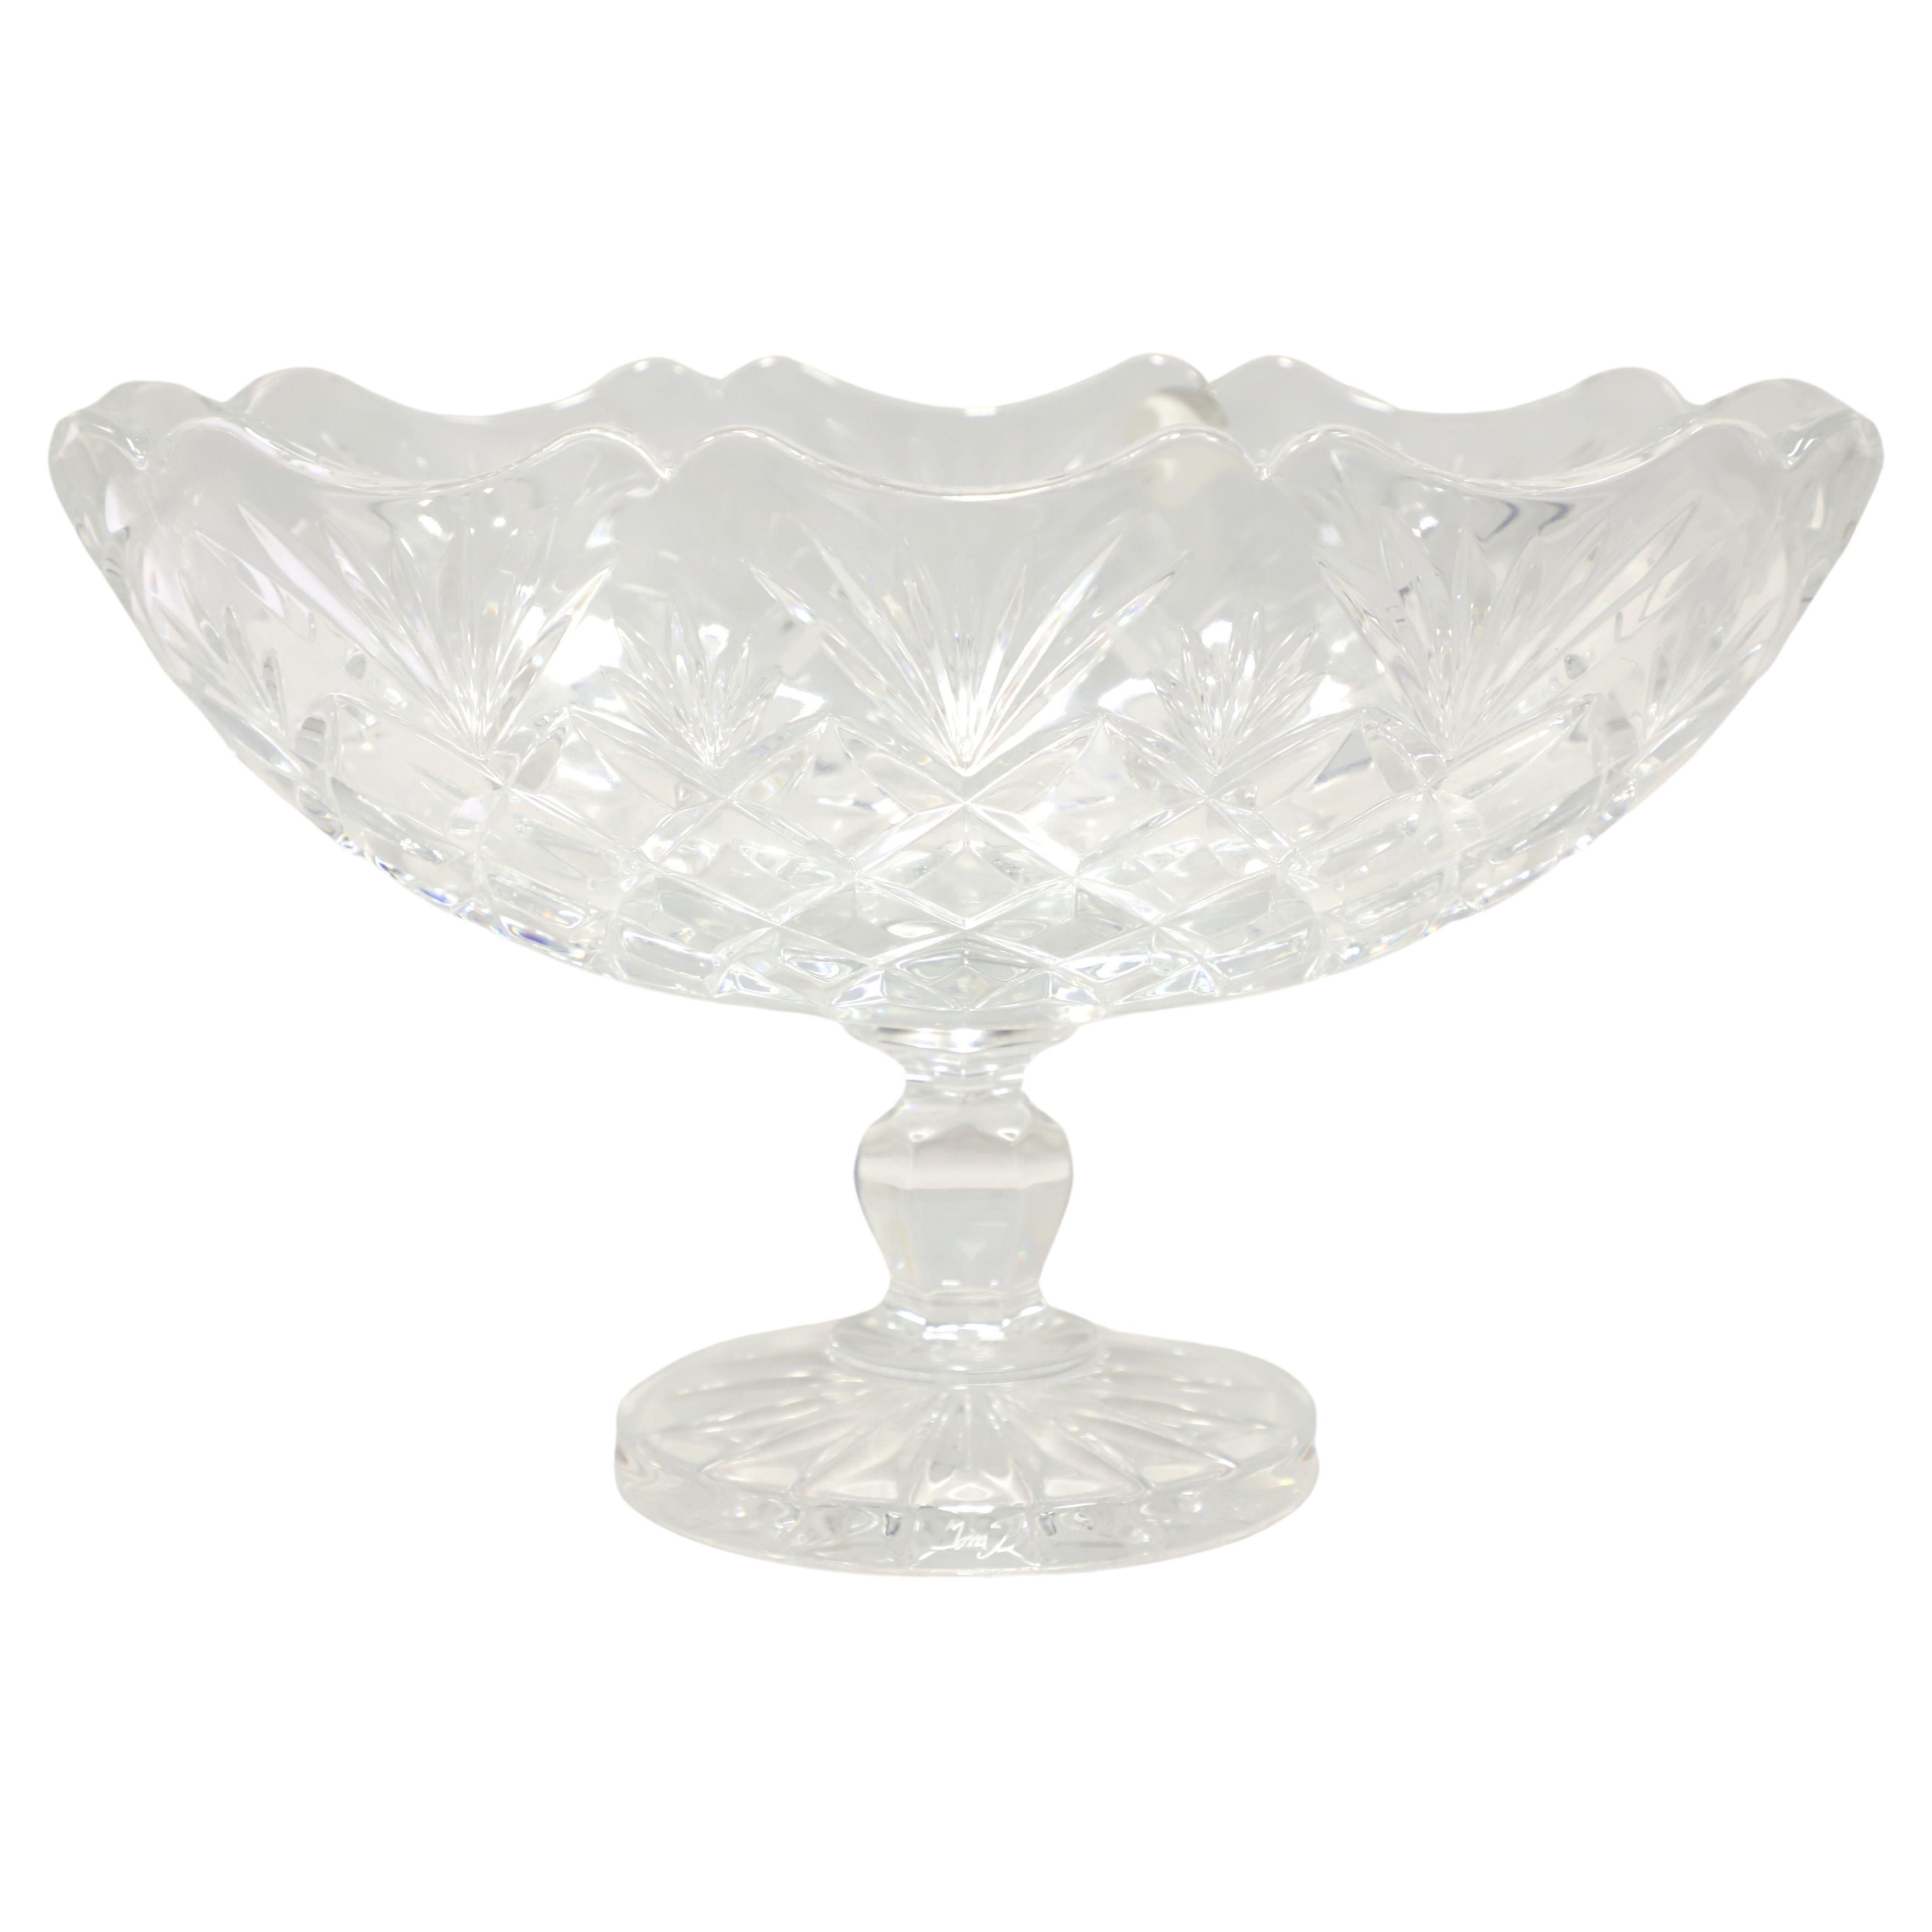 WATERFORD Crystal 11" Irish Treasures Oblong Boat Bowl on Pedestal For Sale